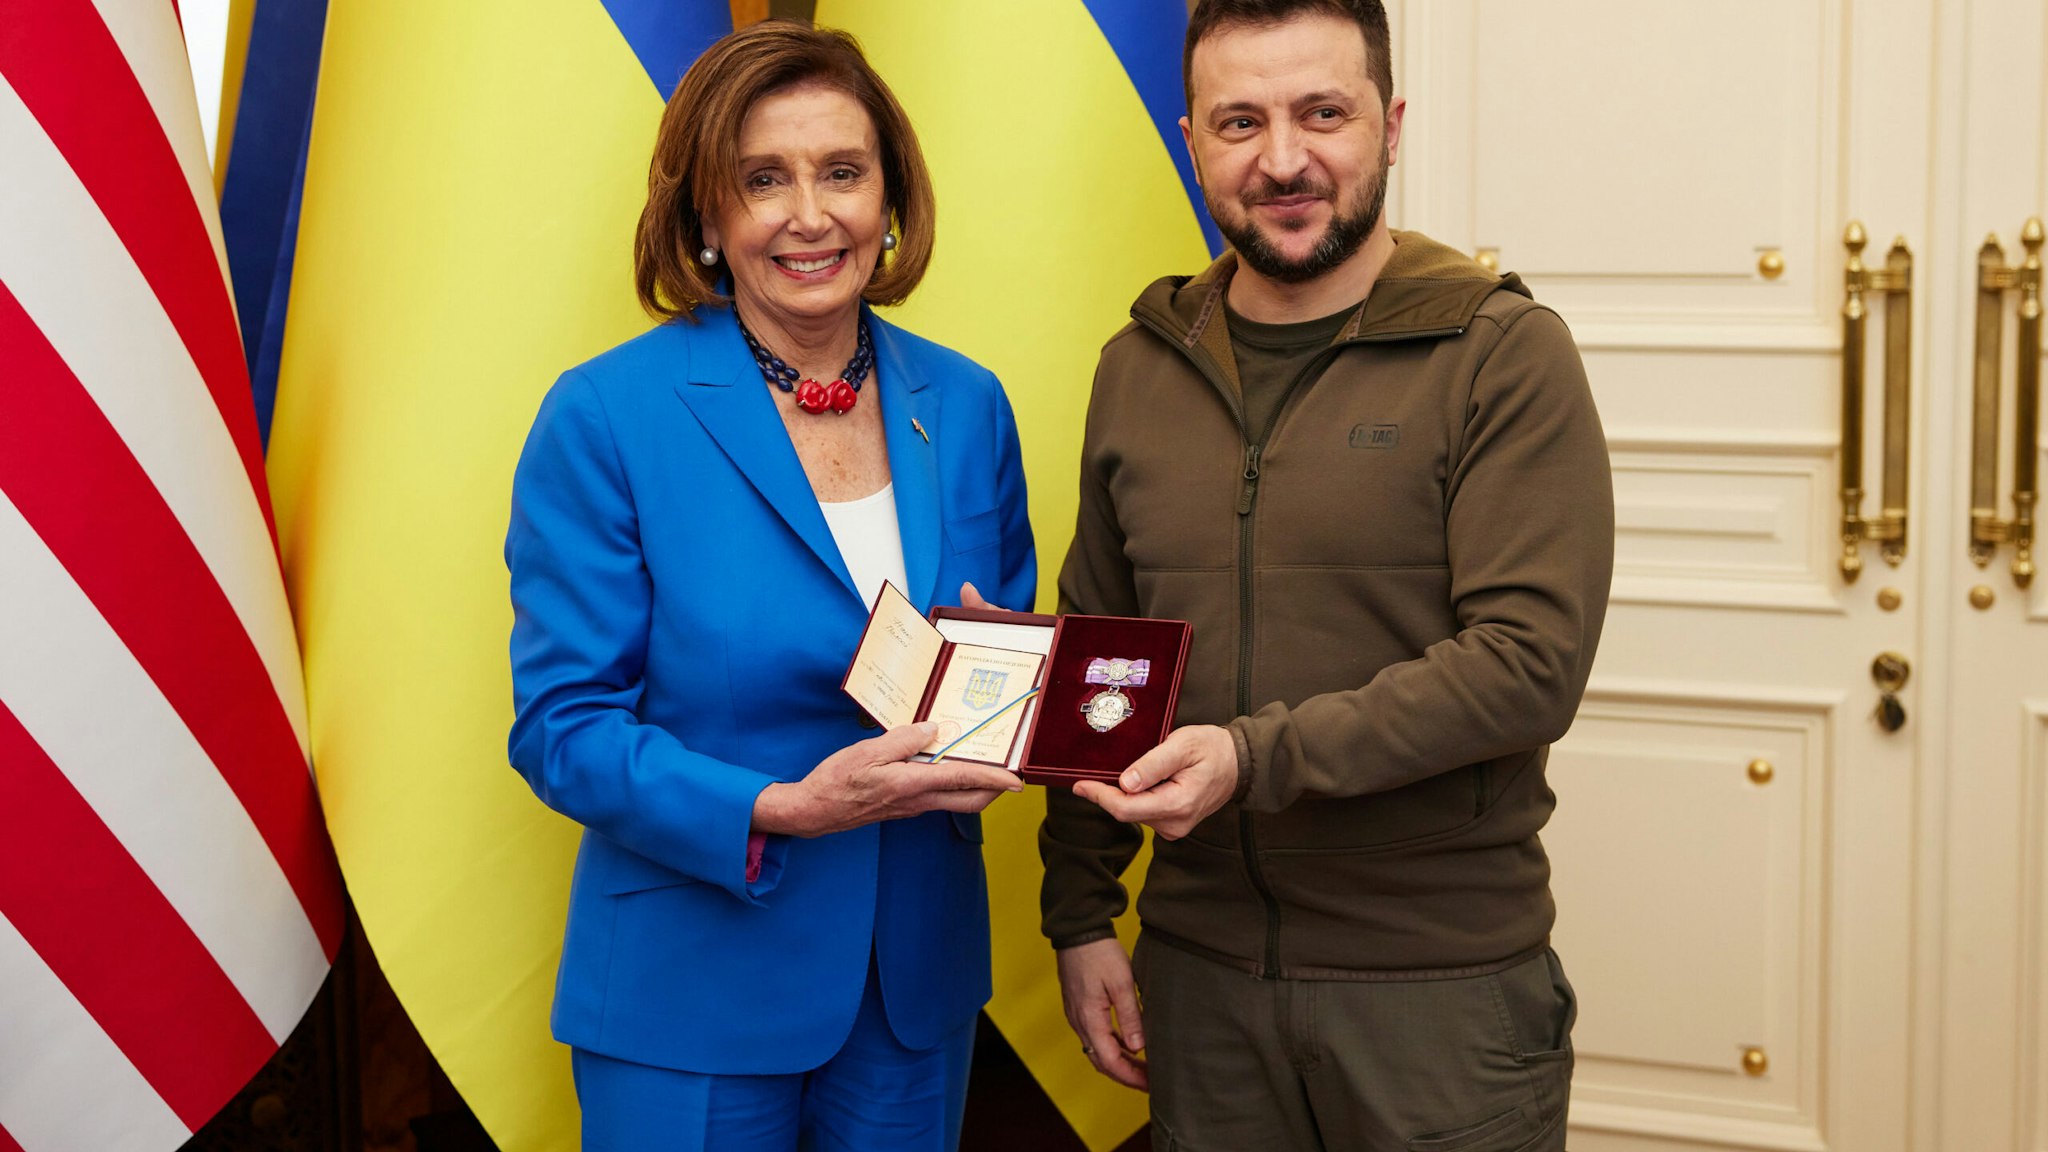 KYIV, UKRAINE - APRIL 30: Ukrainian President Volodymyr Zelensky presents the Order of Princess Olga, a Ukrainian civil decoration, to U.S. Speaker of the House Nancy Pelosi during a visit by a U.S. congressional delegation on April 30, 2022 in Kyiv, Ukraine. The US Speaker of the House led a congressional delegation, which on a secret meeting with the Ukrainian president that was announced the next day, as they left the country for nearby Poland.